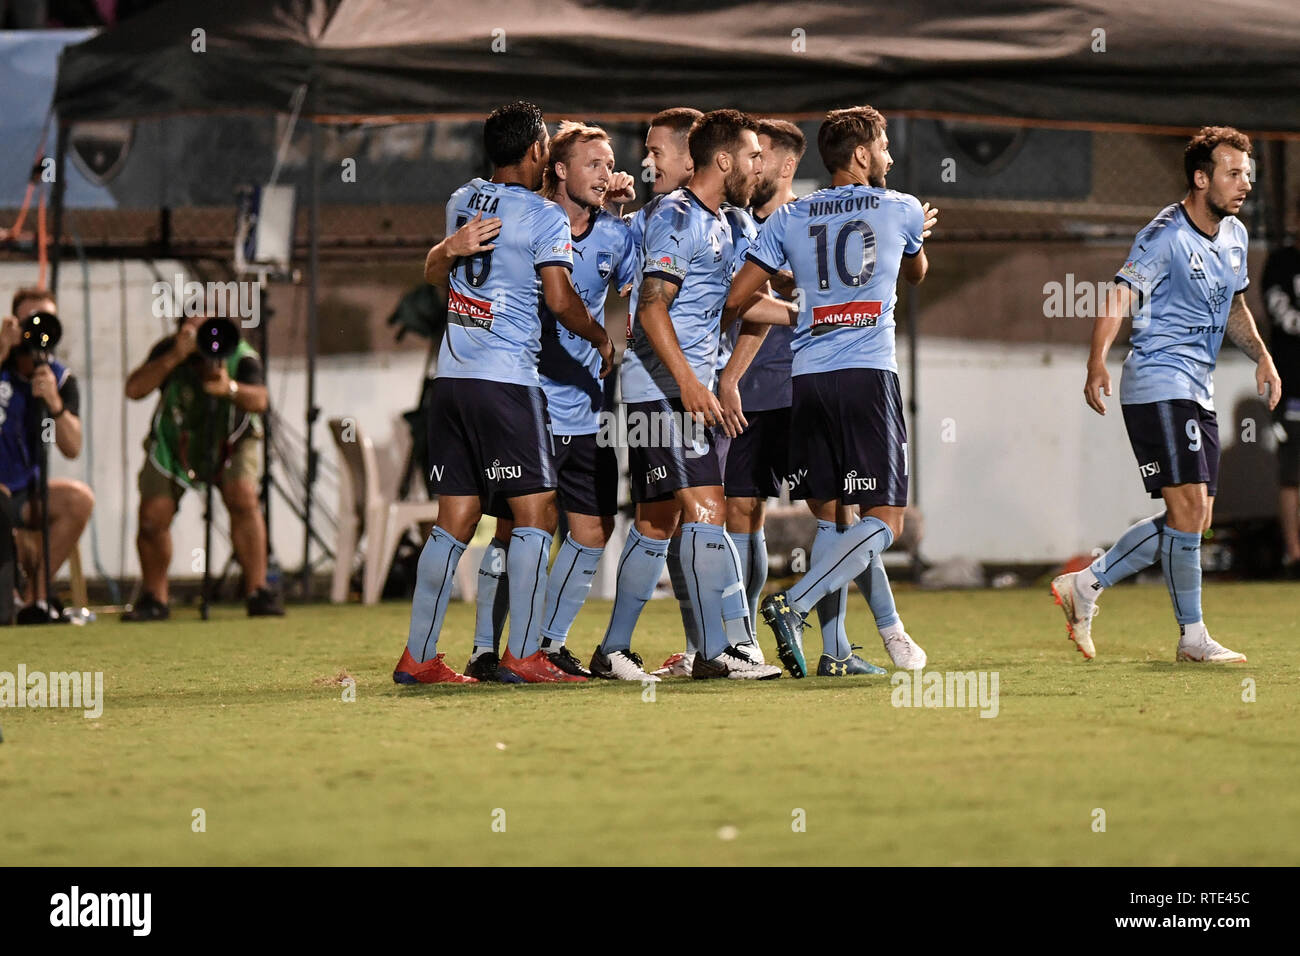 Leichhardt Oval, Leichhardt, Australia. 1st Mar, 2019. A League football Sydney FC versus Adelaide United; Reza Ghoochannejhad of Sydney is congratulated by teammates after scoring to make it 1-0 Credit: Action Plus Sports/Alamy Live News Stock Photo